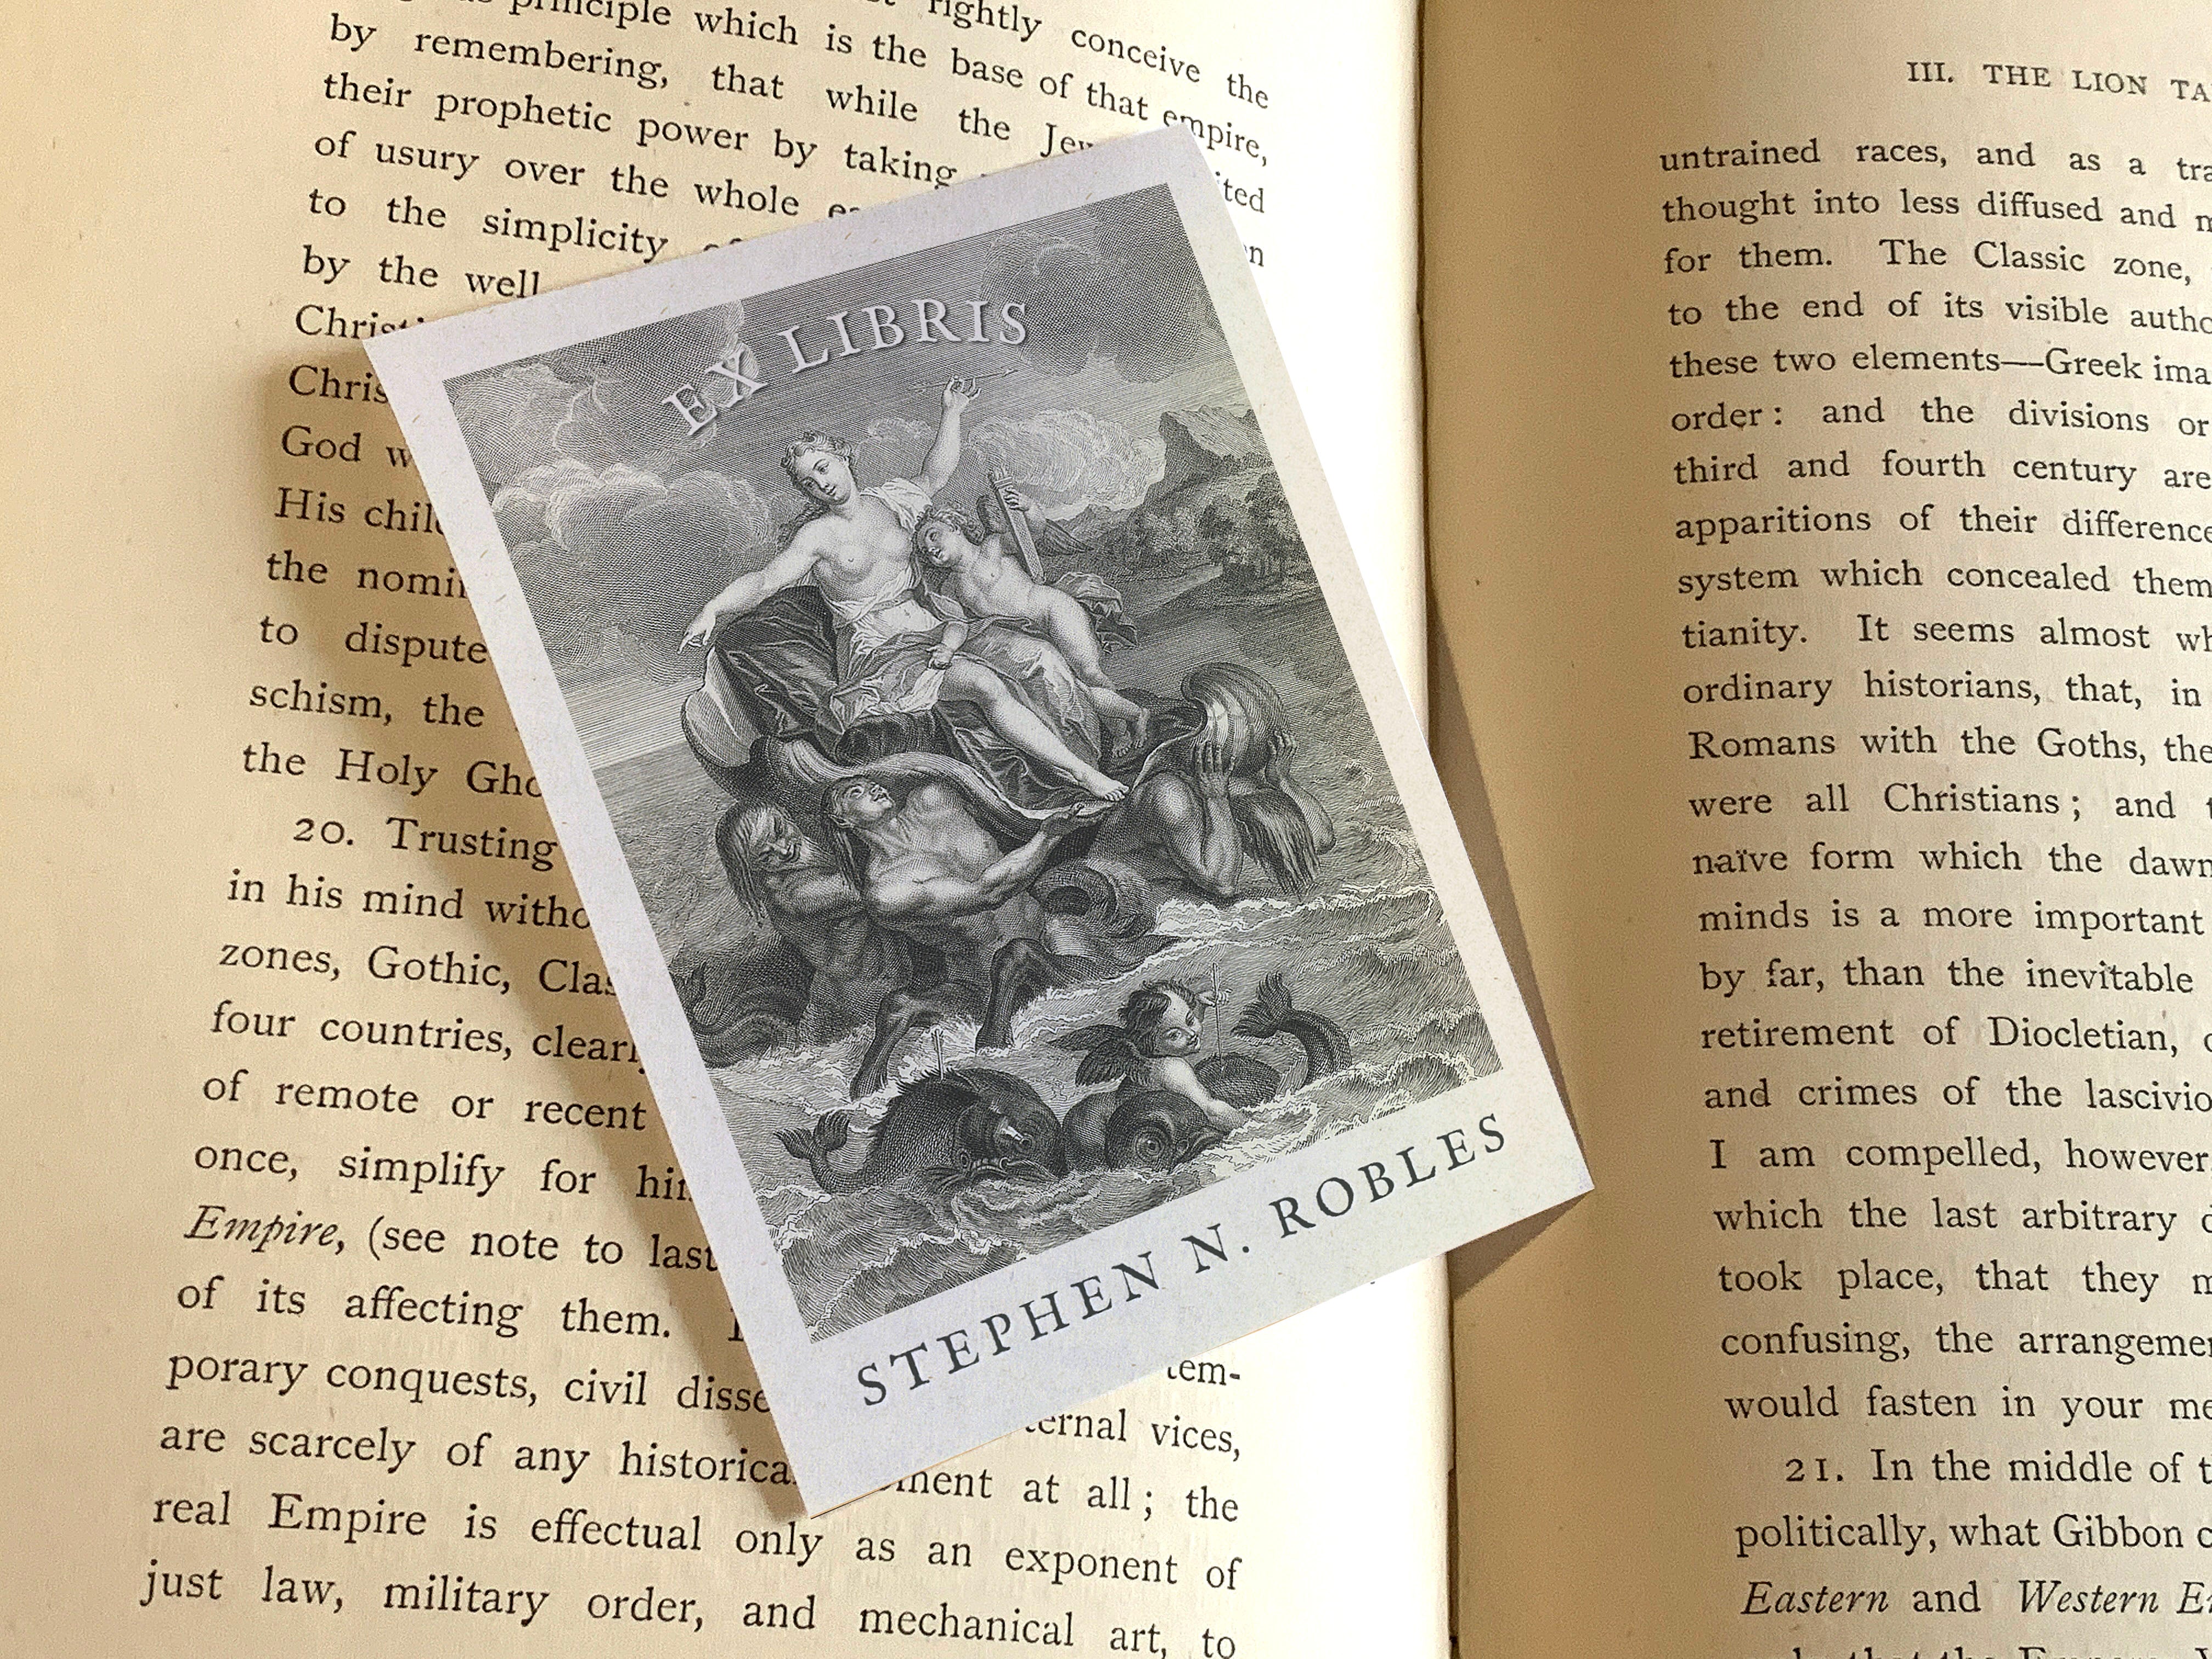 Triumph of the Marine Venus, Personalized Ex-Libris Bookplates, Crafted on Traditional Gummed Paper, 3in x 4in, Set of 30